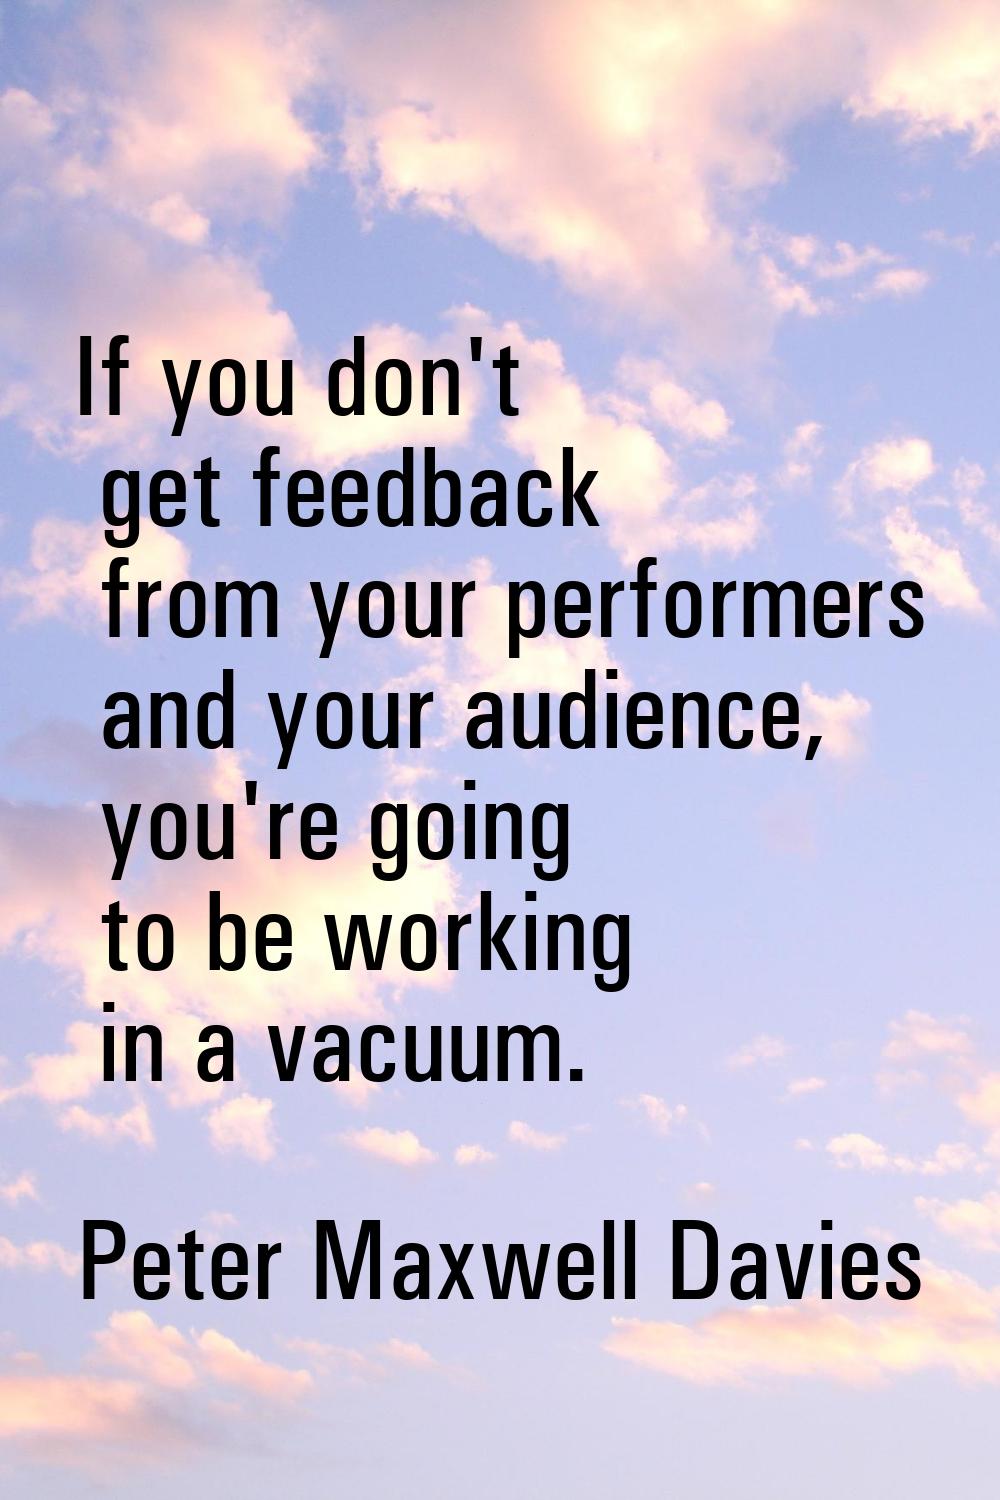 If you don't get feedback from your performers and your audience, you're going to be working in a v